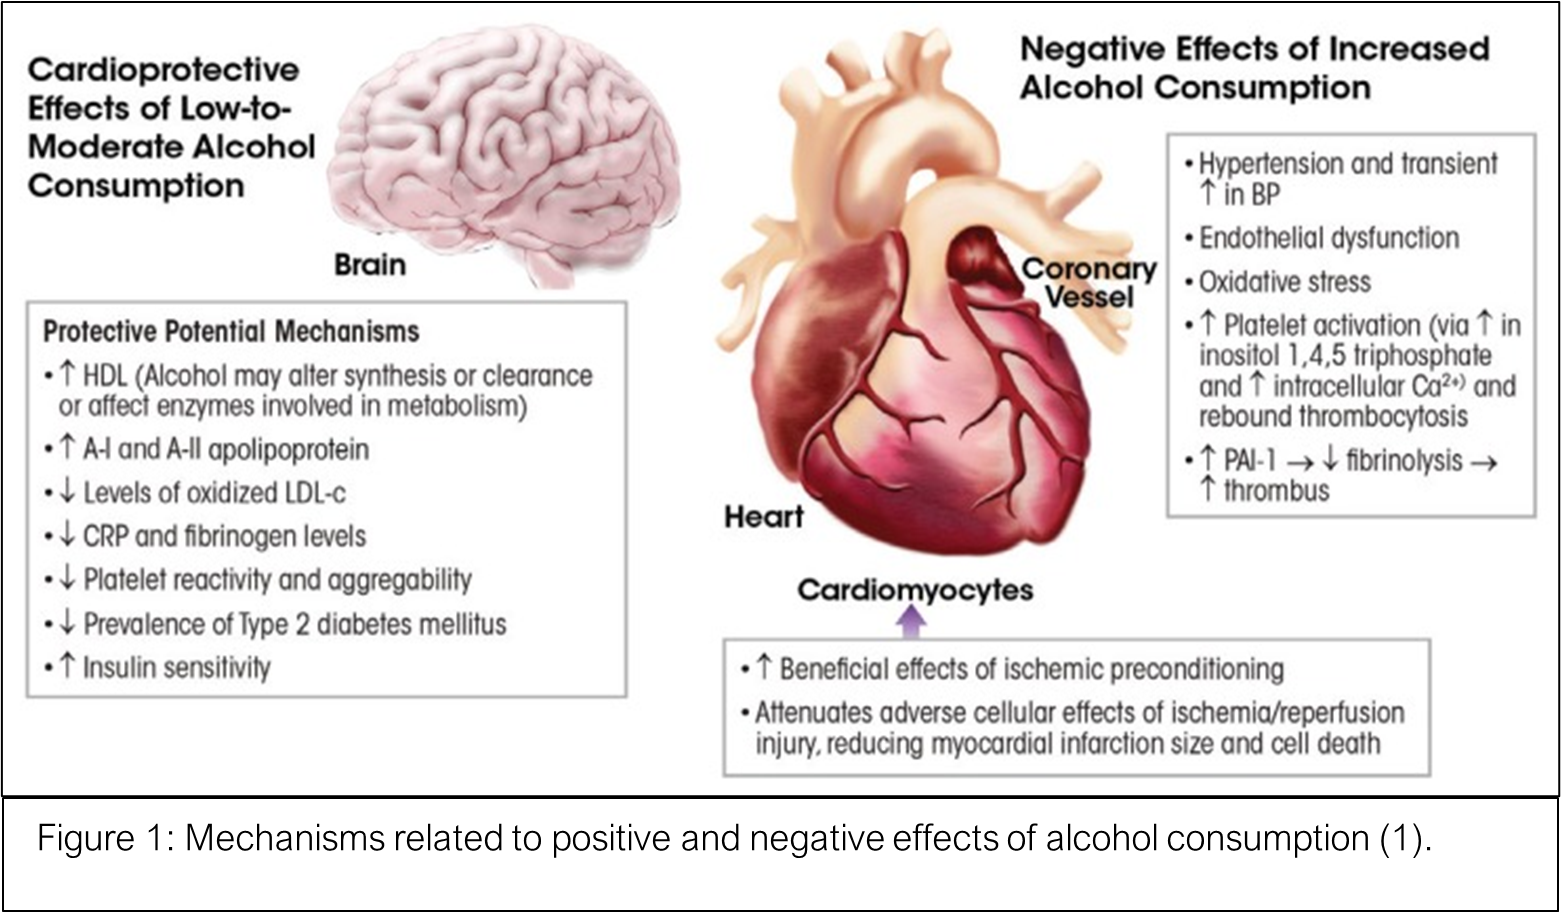 The controversy over alcohol consumption: Is it good or bad for your heart?